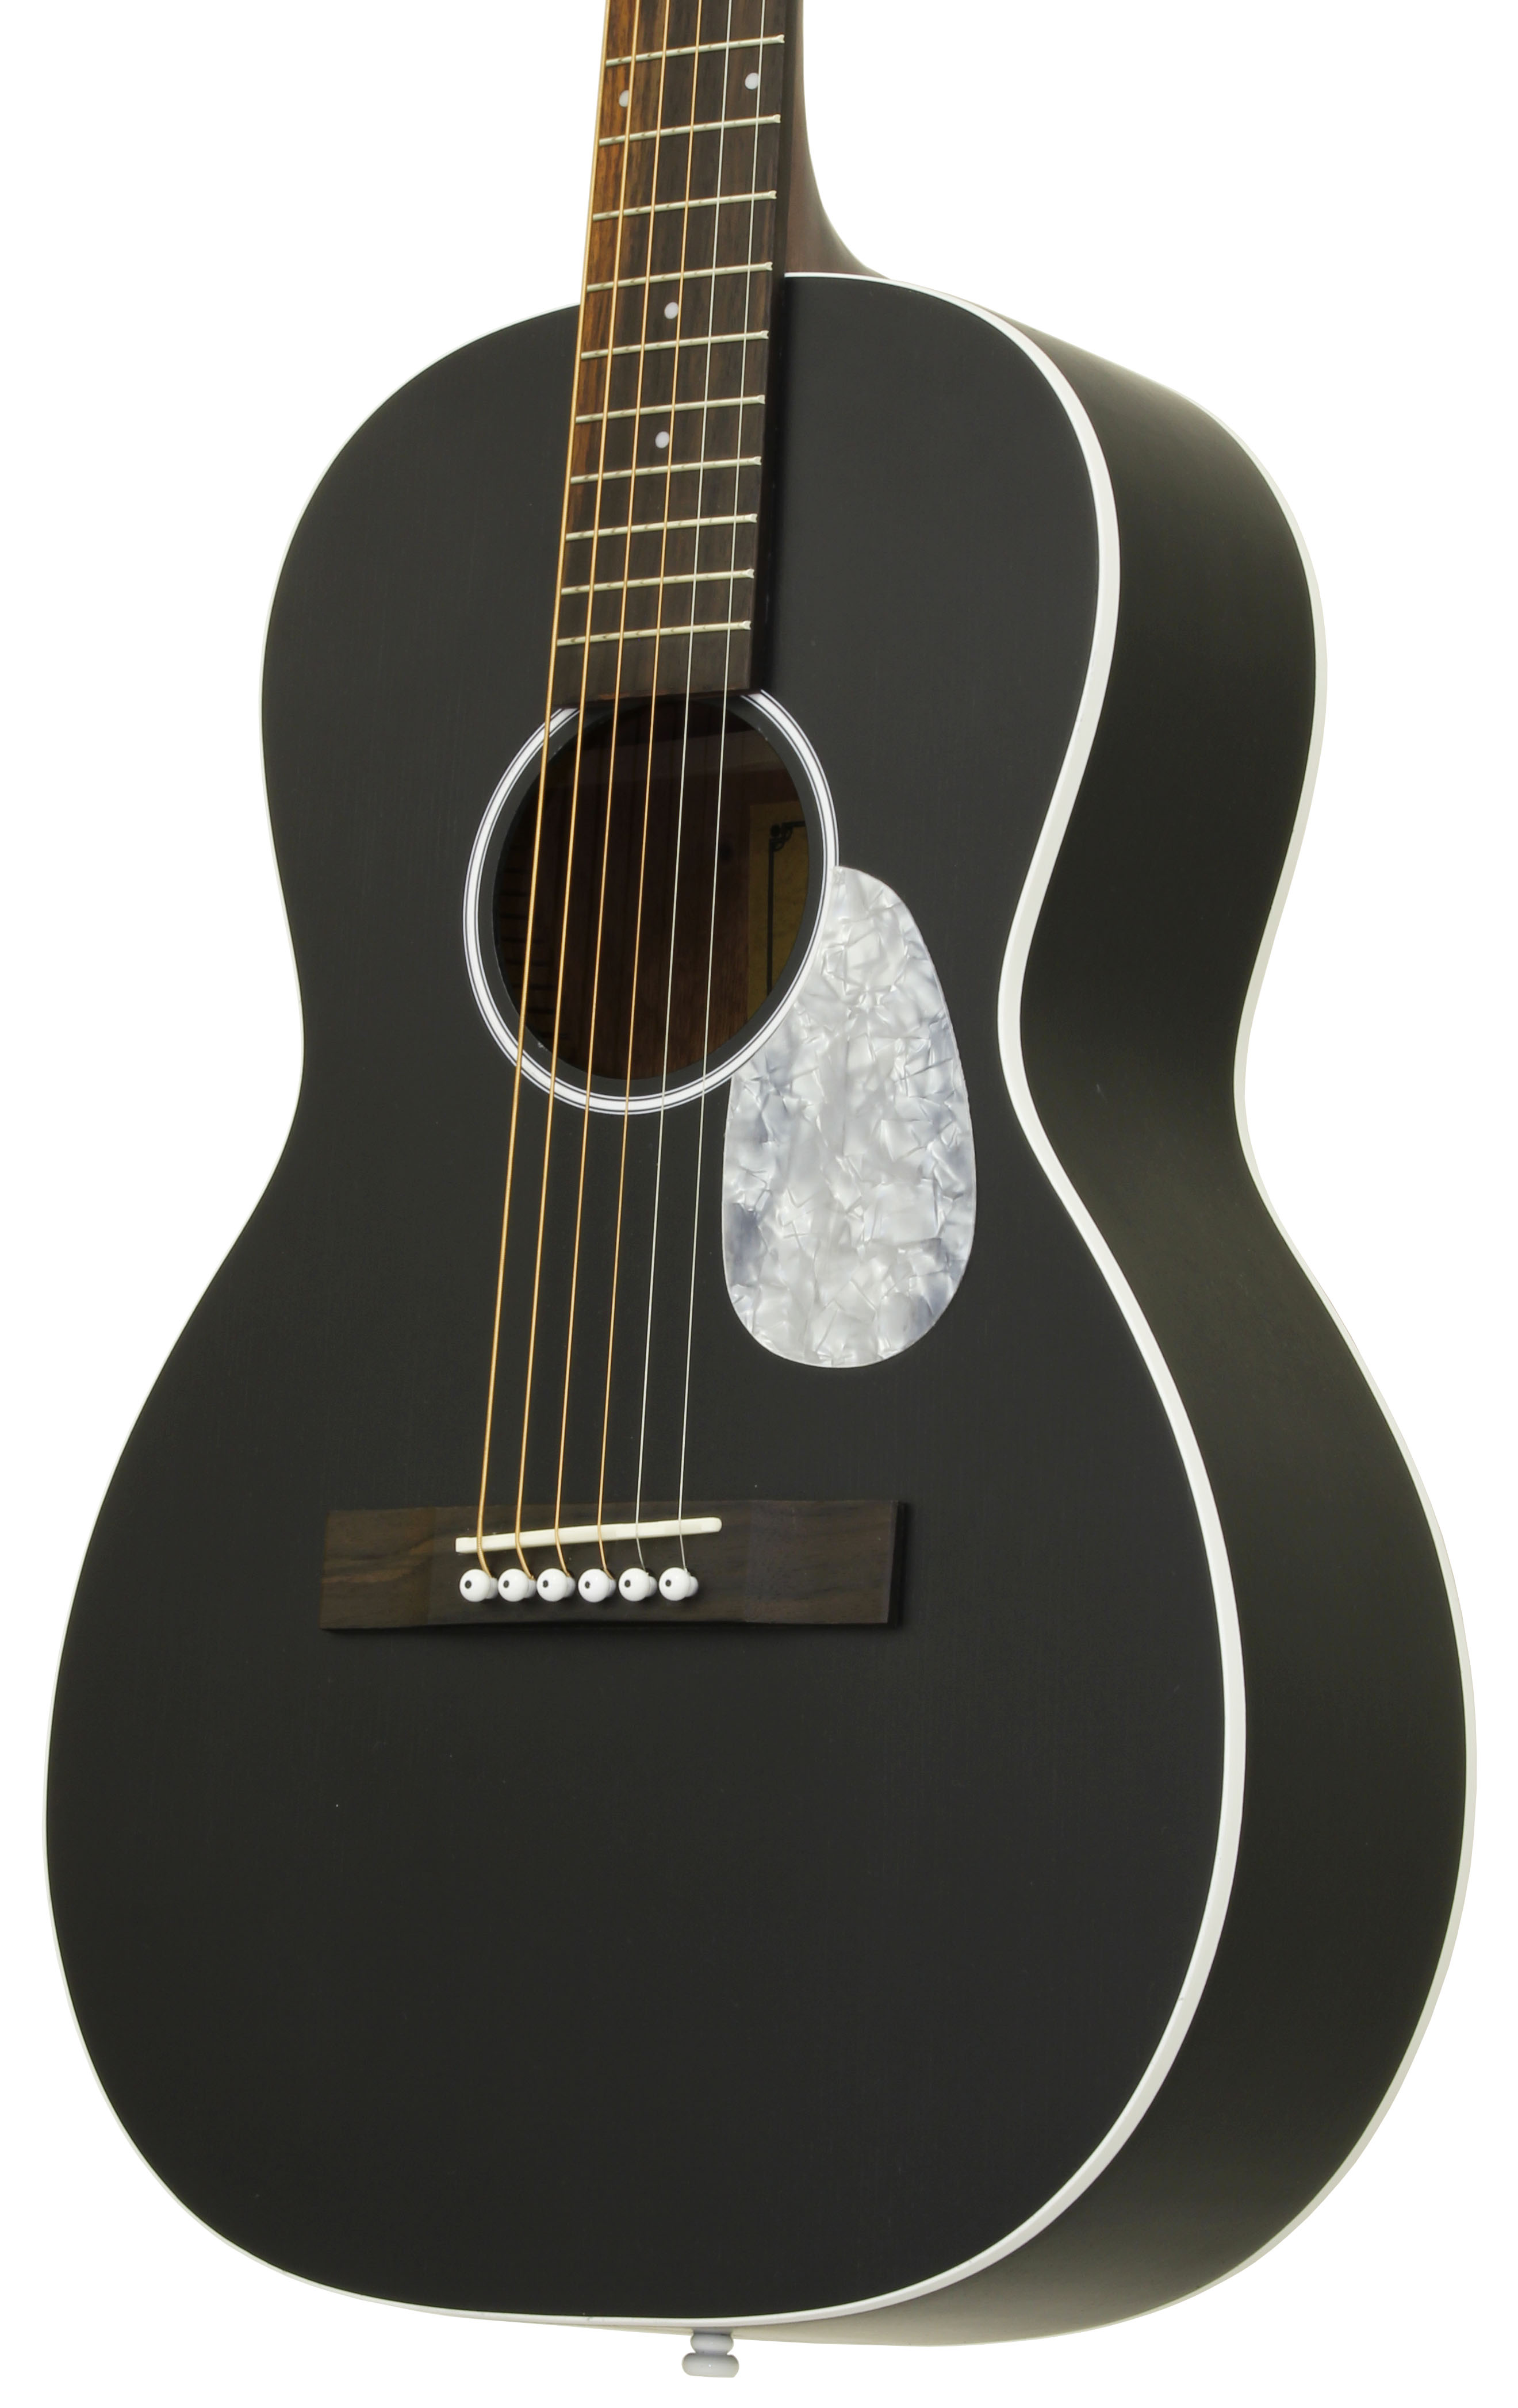 ARIA 131 Urban Player, stained black